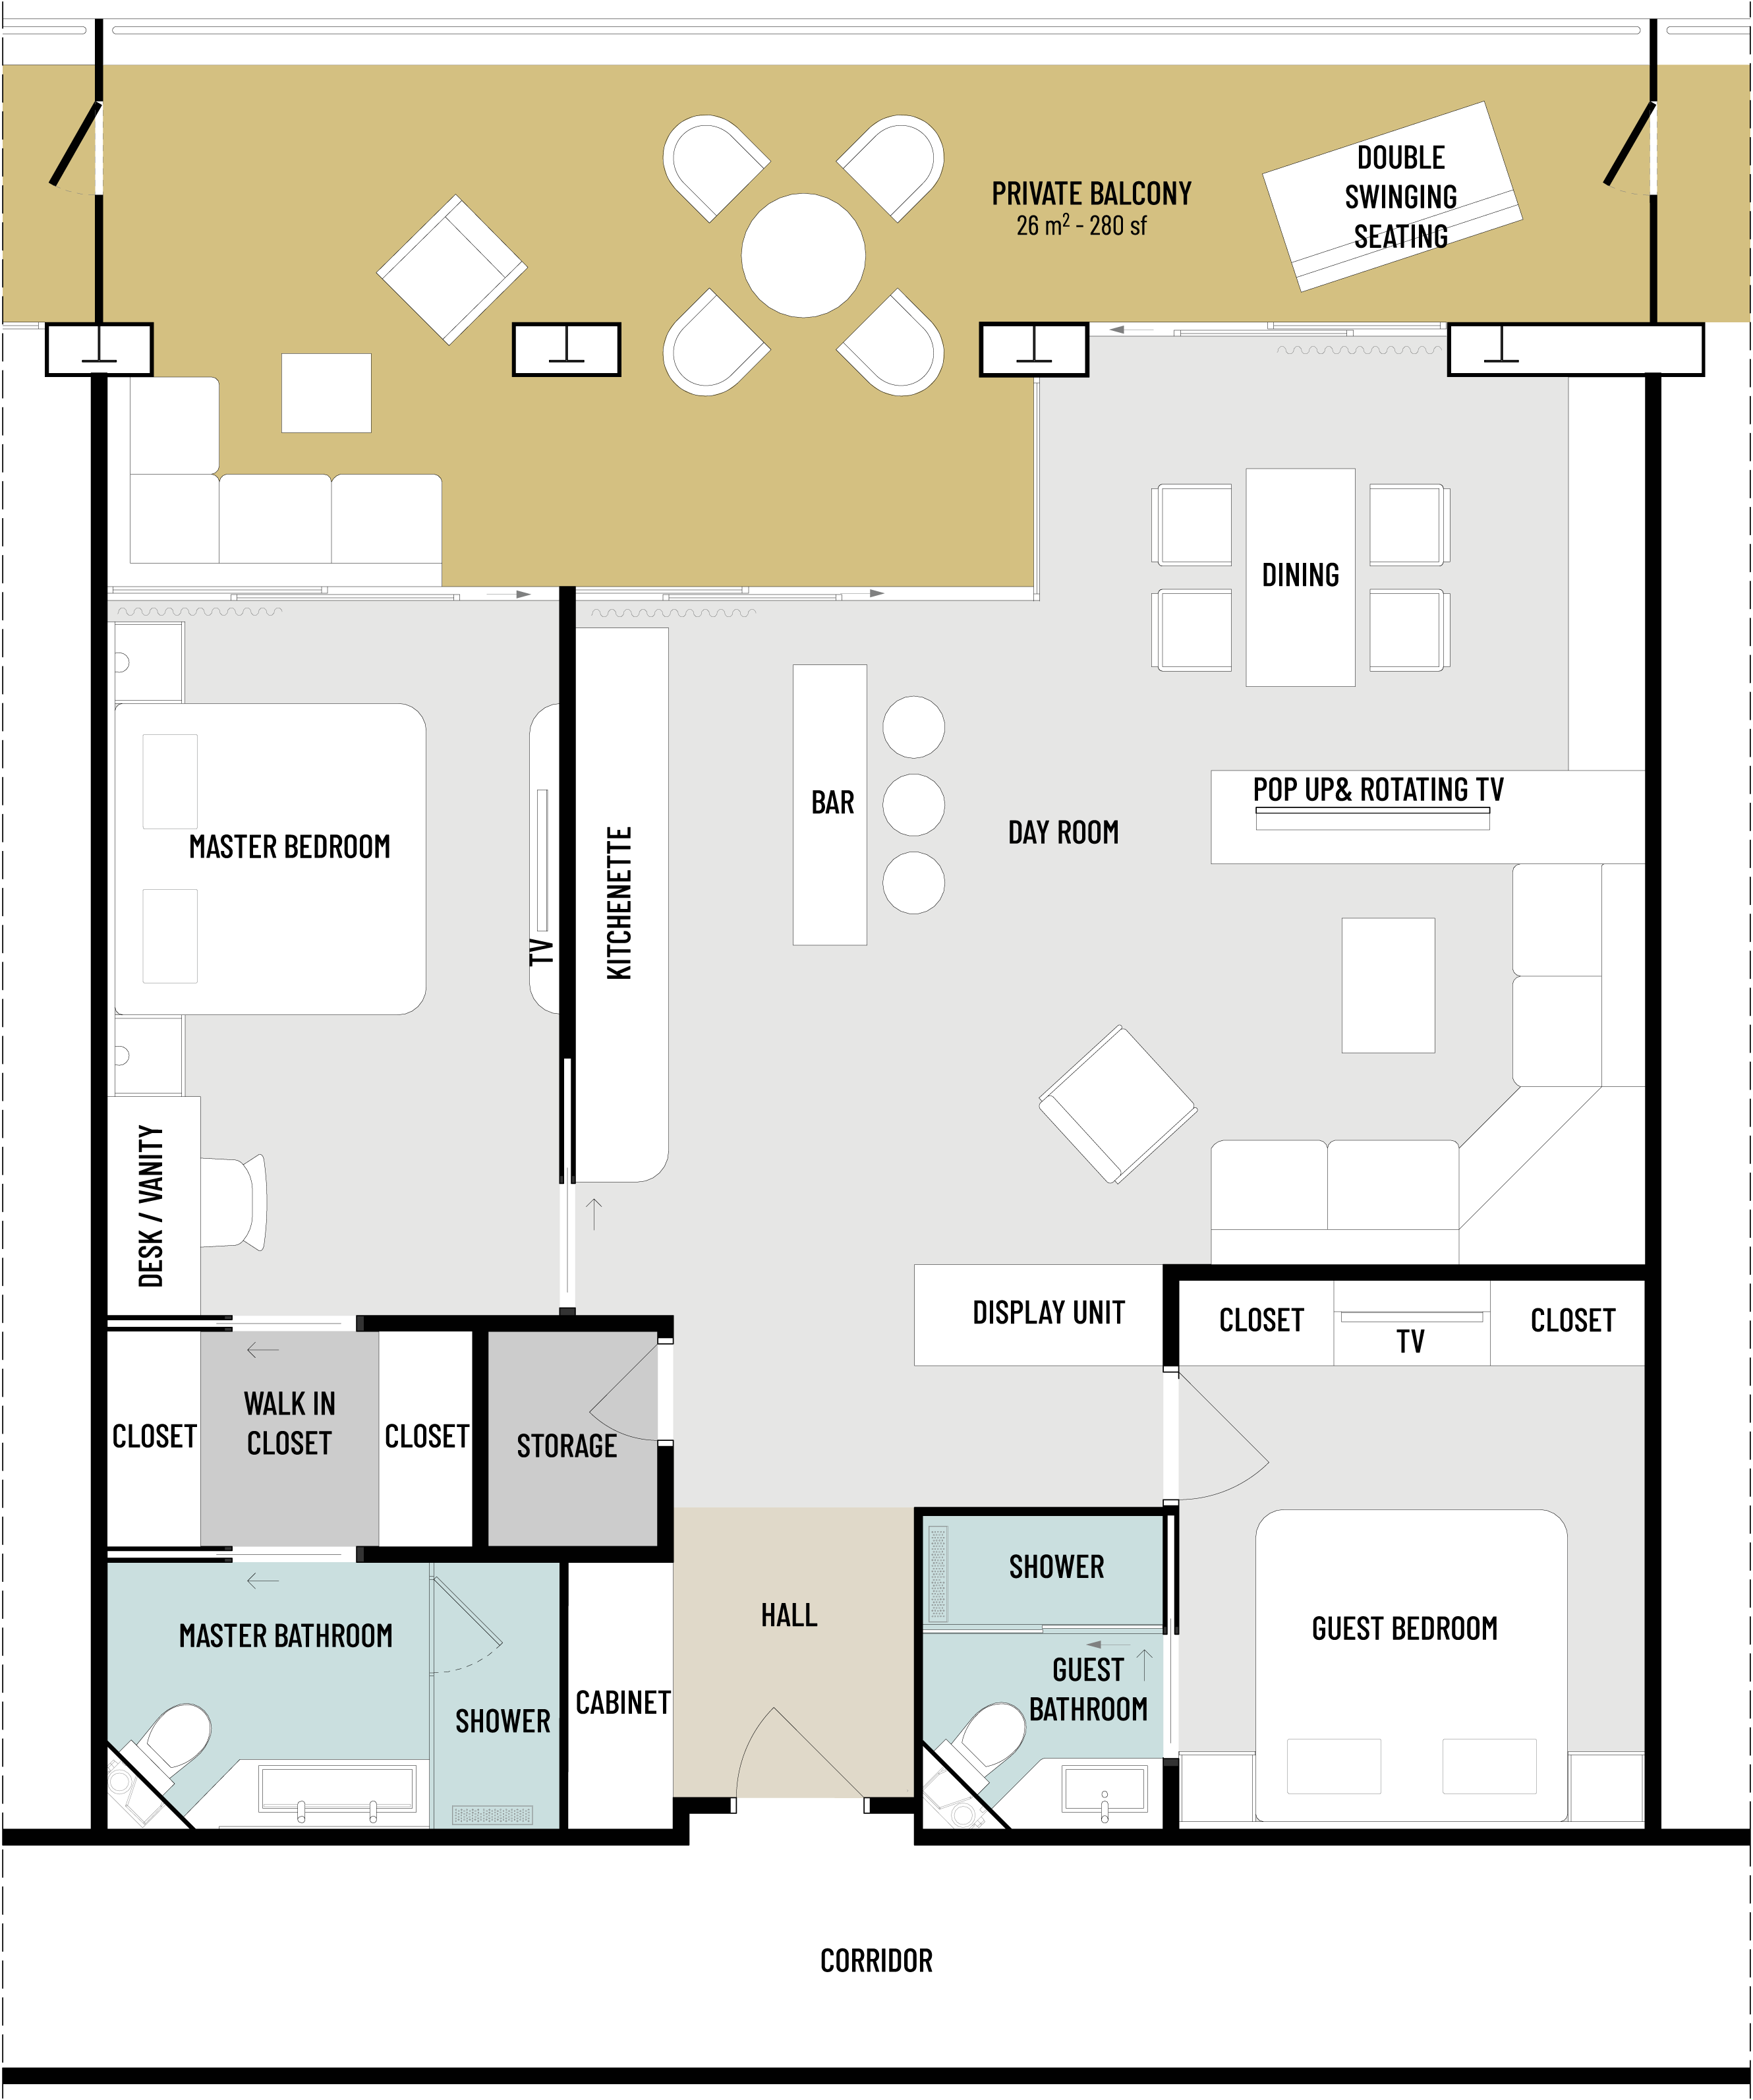 Floorplan of RU4.3 residential ship home showing Living, dining, bar and kitchenette, as well as master and guest bedrooms, bathrooms and balcony